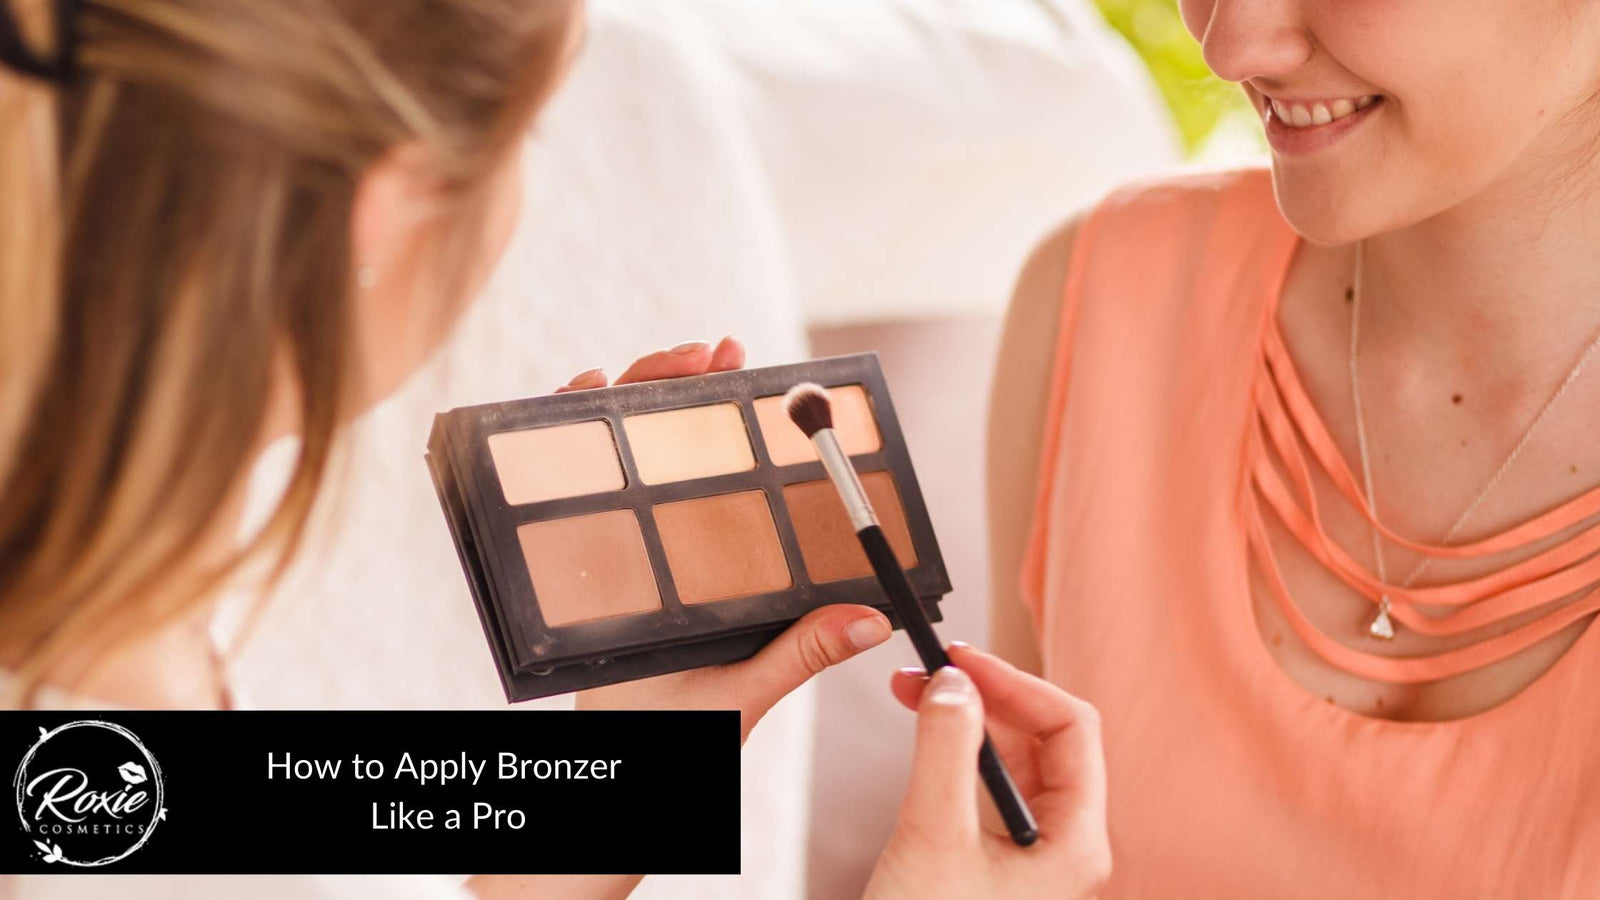 How to Apply Bronzer